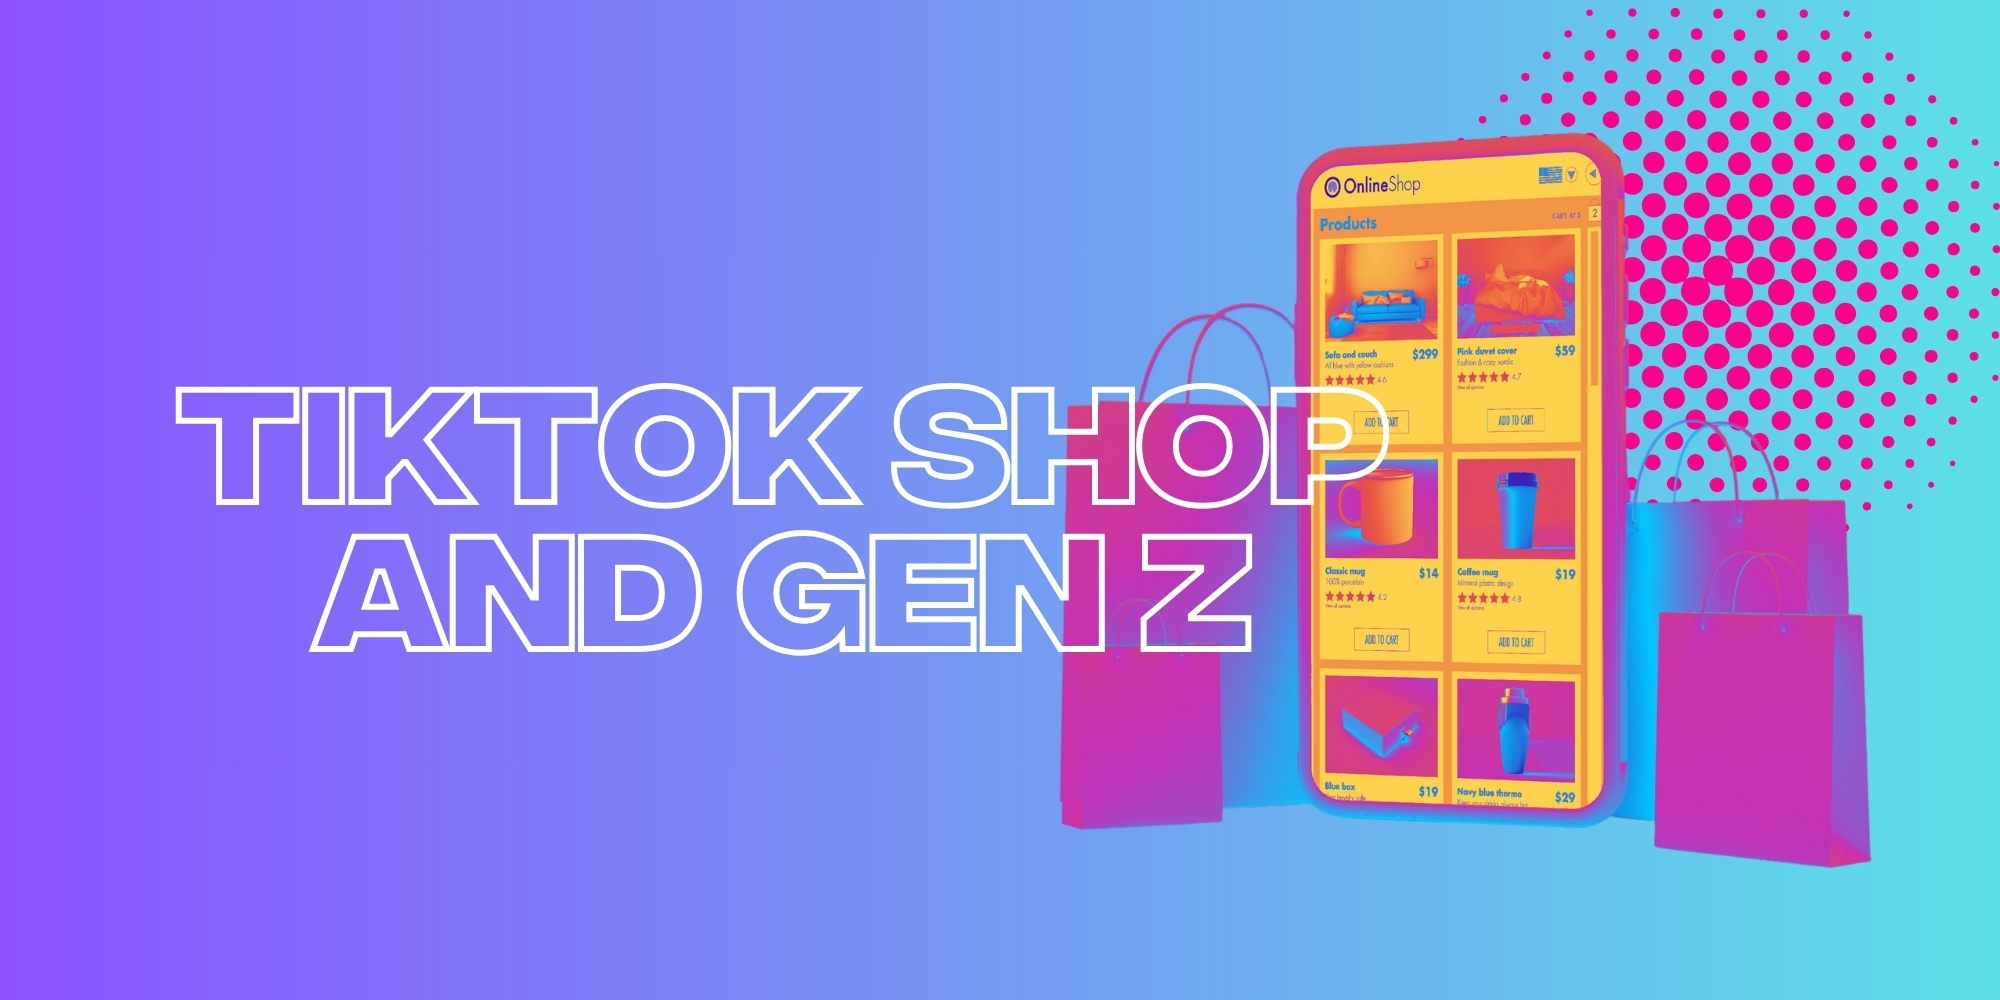 What Makes TikTok Shop And Gen Z A Match Made In Heaven?